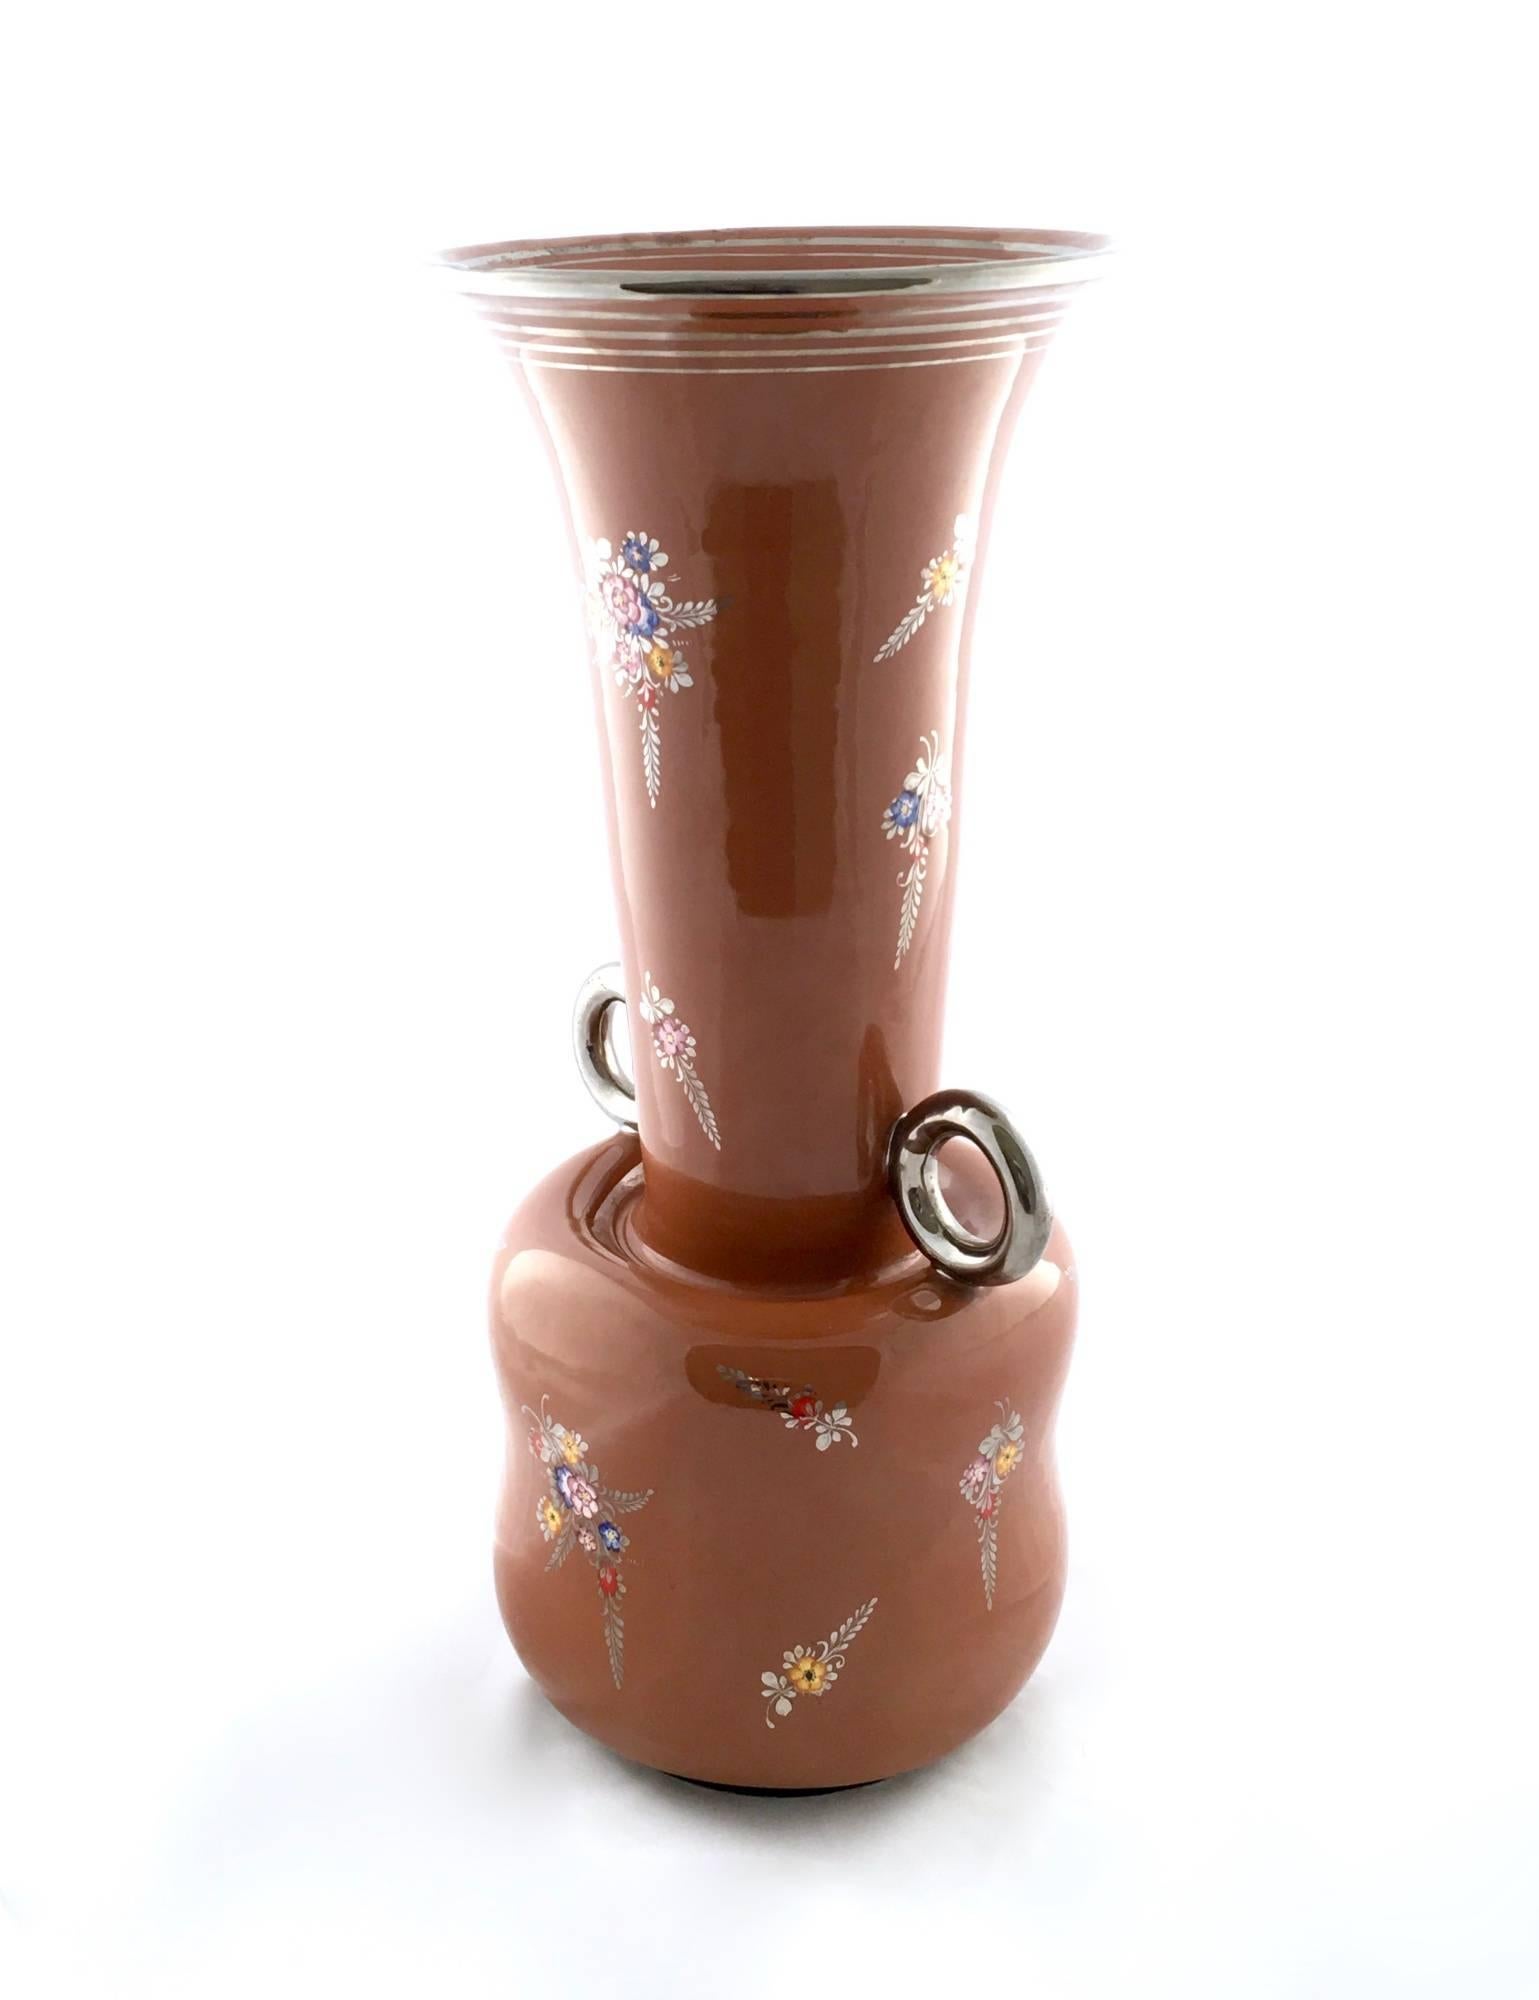 Made in Italy, 1940s. 
This vase is made in lacquered and hand painted terracotta.
It is a vintage piece, therefore it might show slight traces of use, but it can be considered as in excellent original condition and ready to become a piece in a